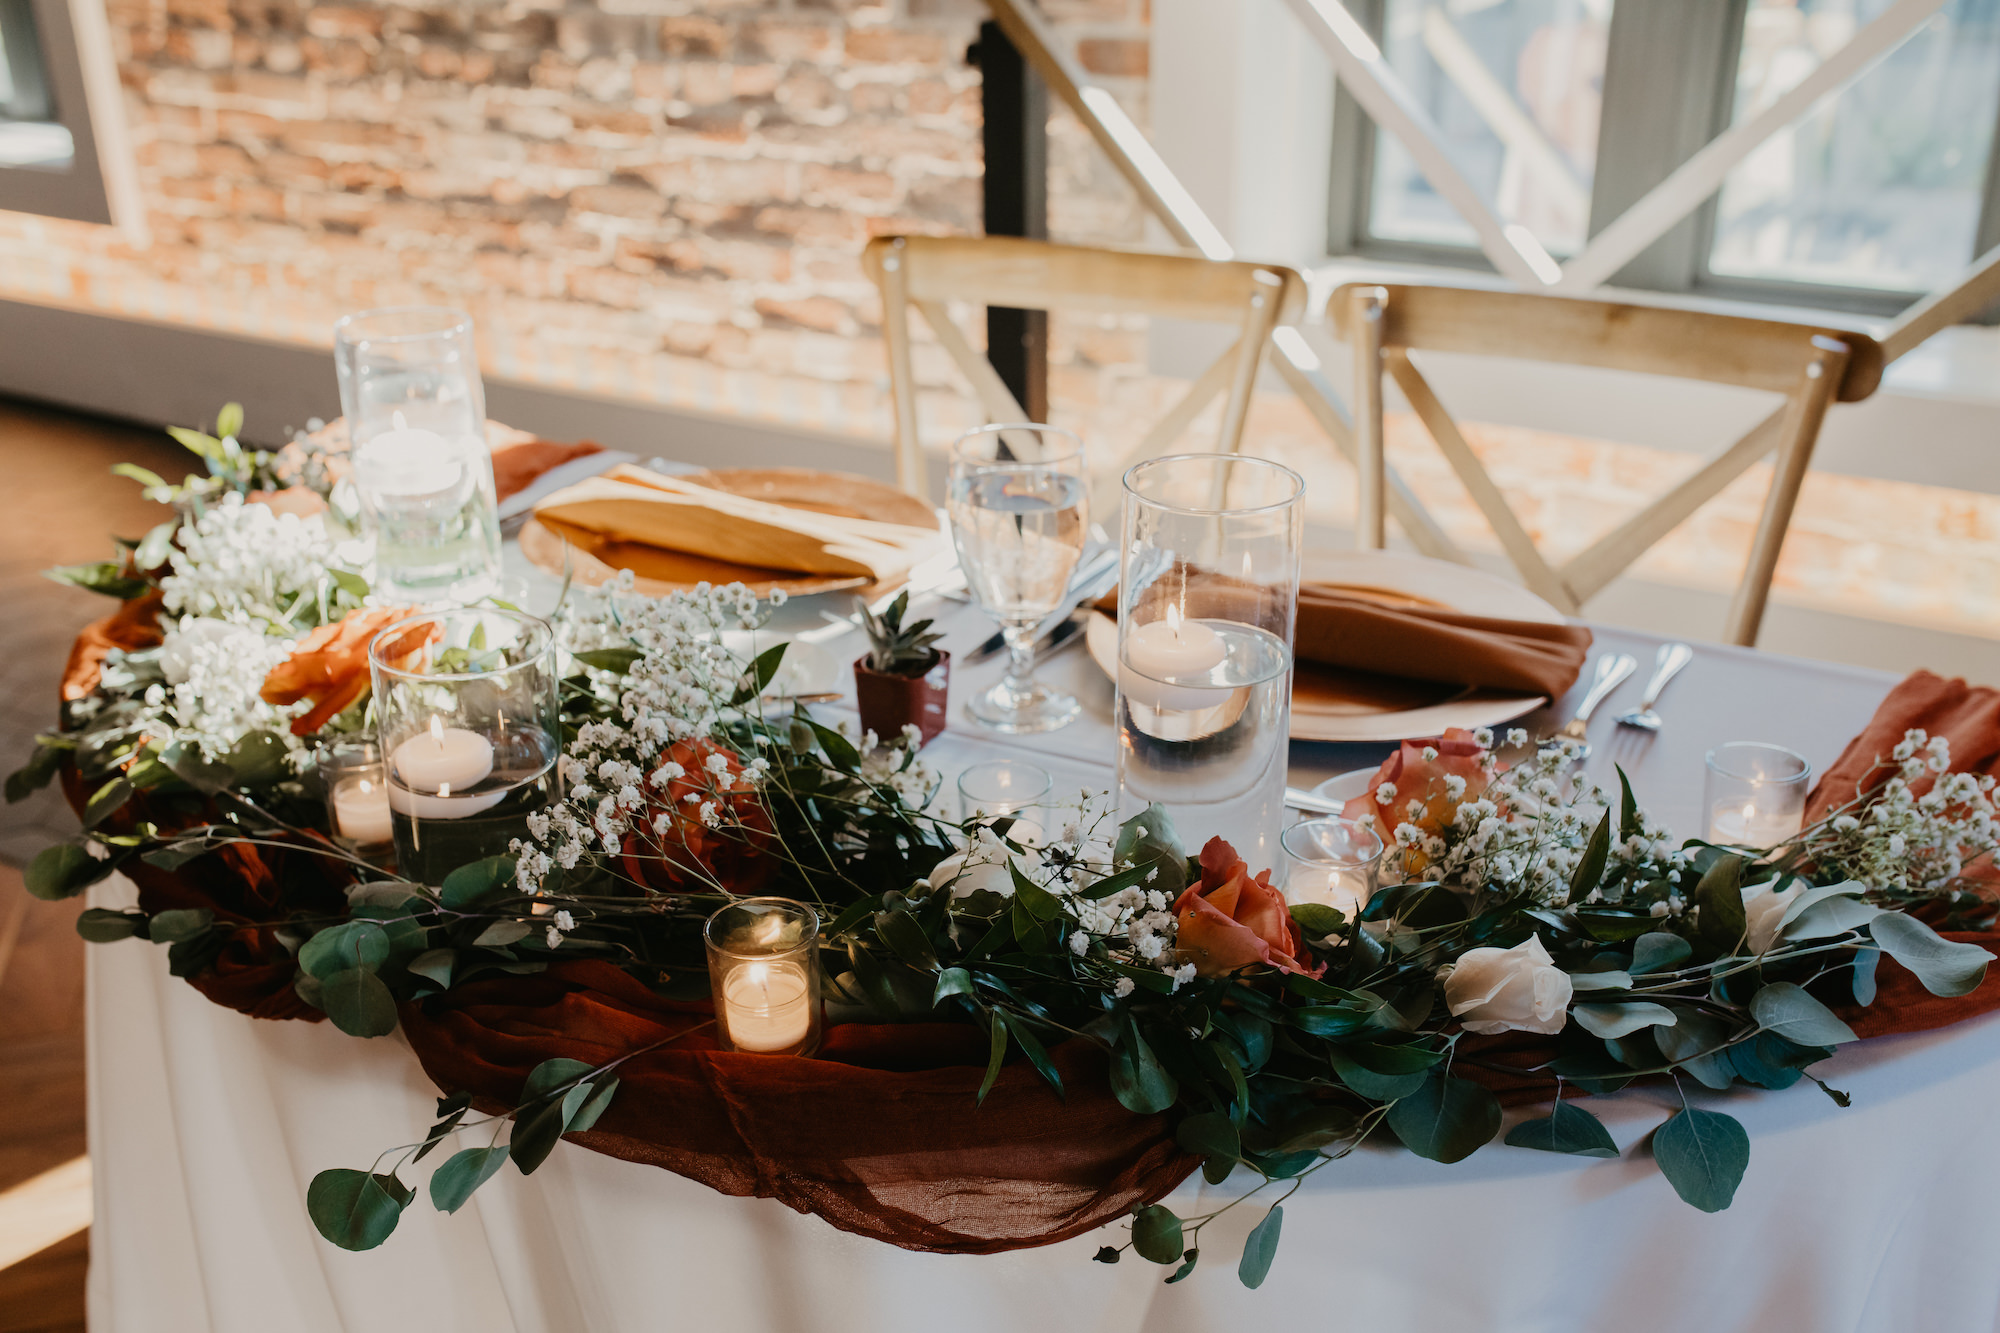 Half Circle Sweetheart Table Decor Ideas | Crossback Wooden Chairs with Terracotta Cheese Cloth, Floating Candles | Eucalyptus Garland with Roses and Baby's Breath